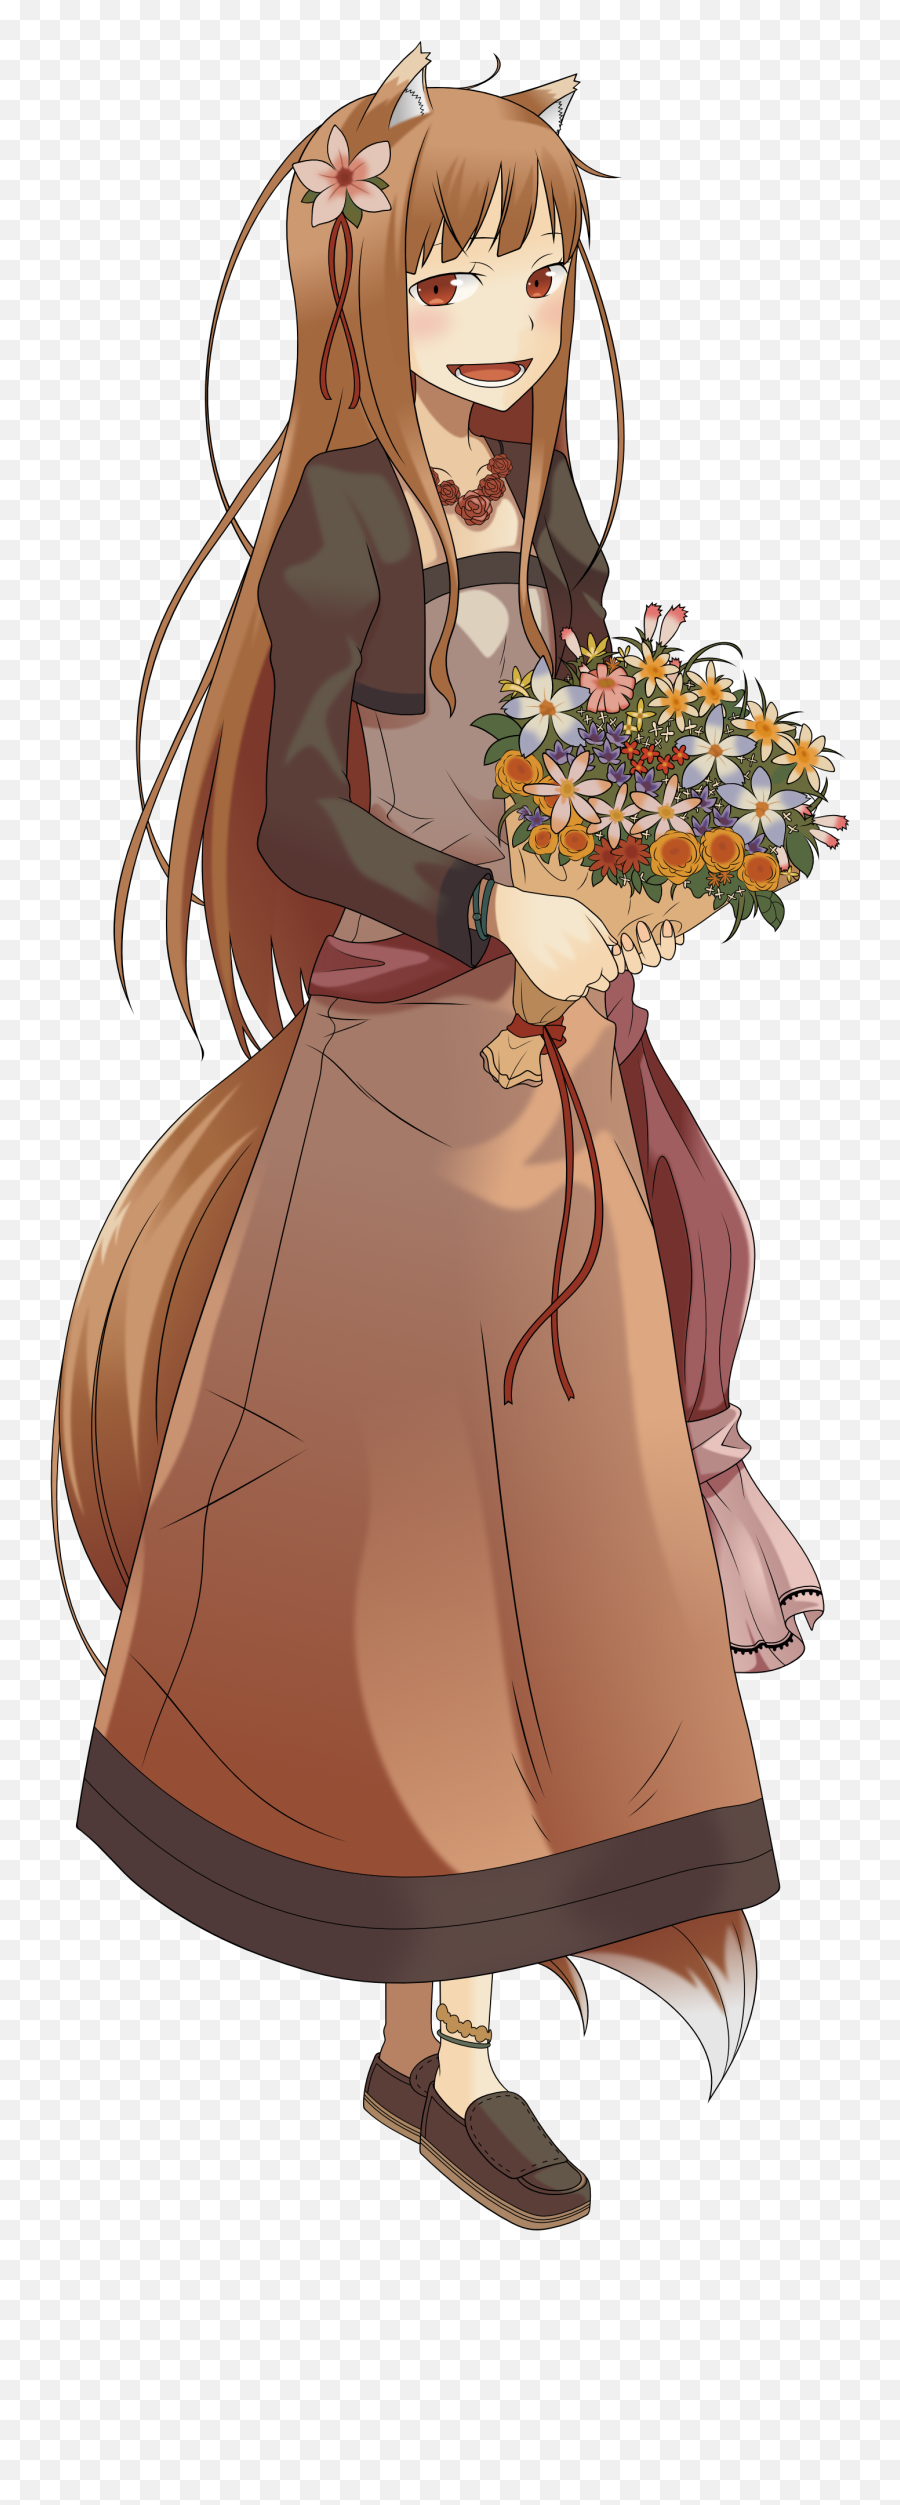 Holo Spice Wolf Outfit - Holo Spice And Wolf Outfits Png,Holo Png